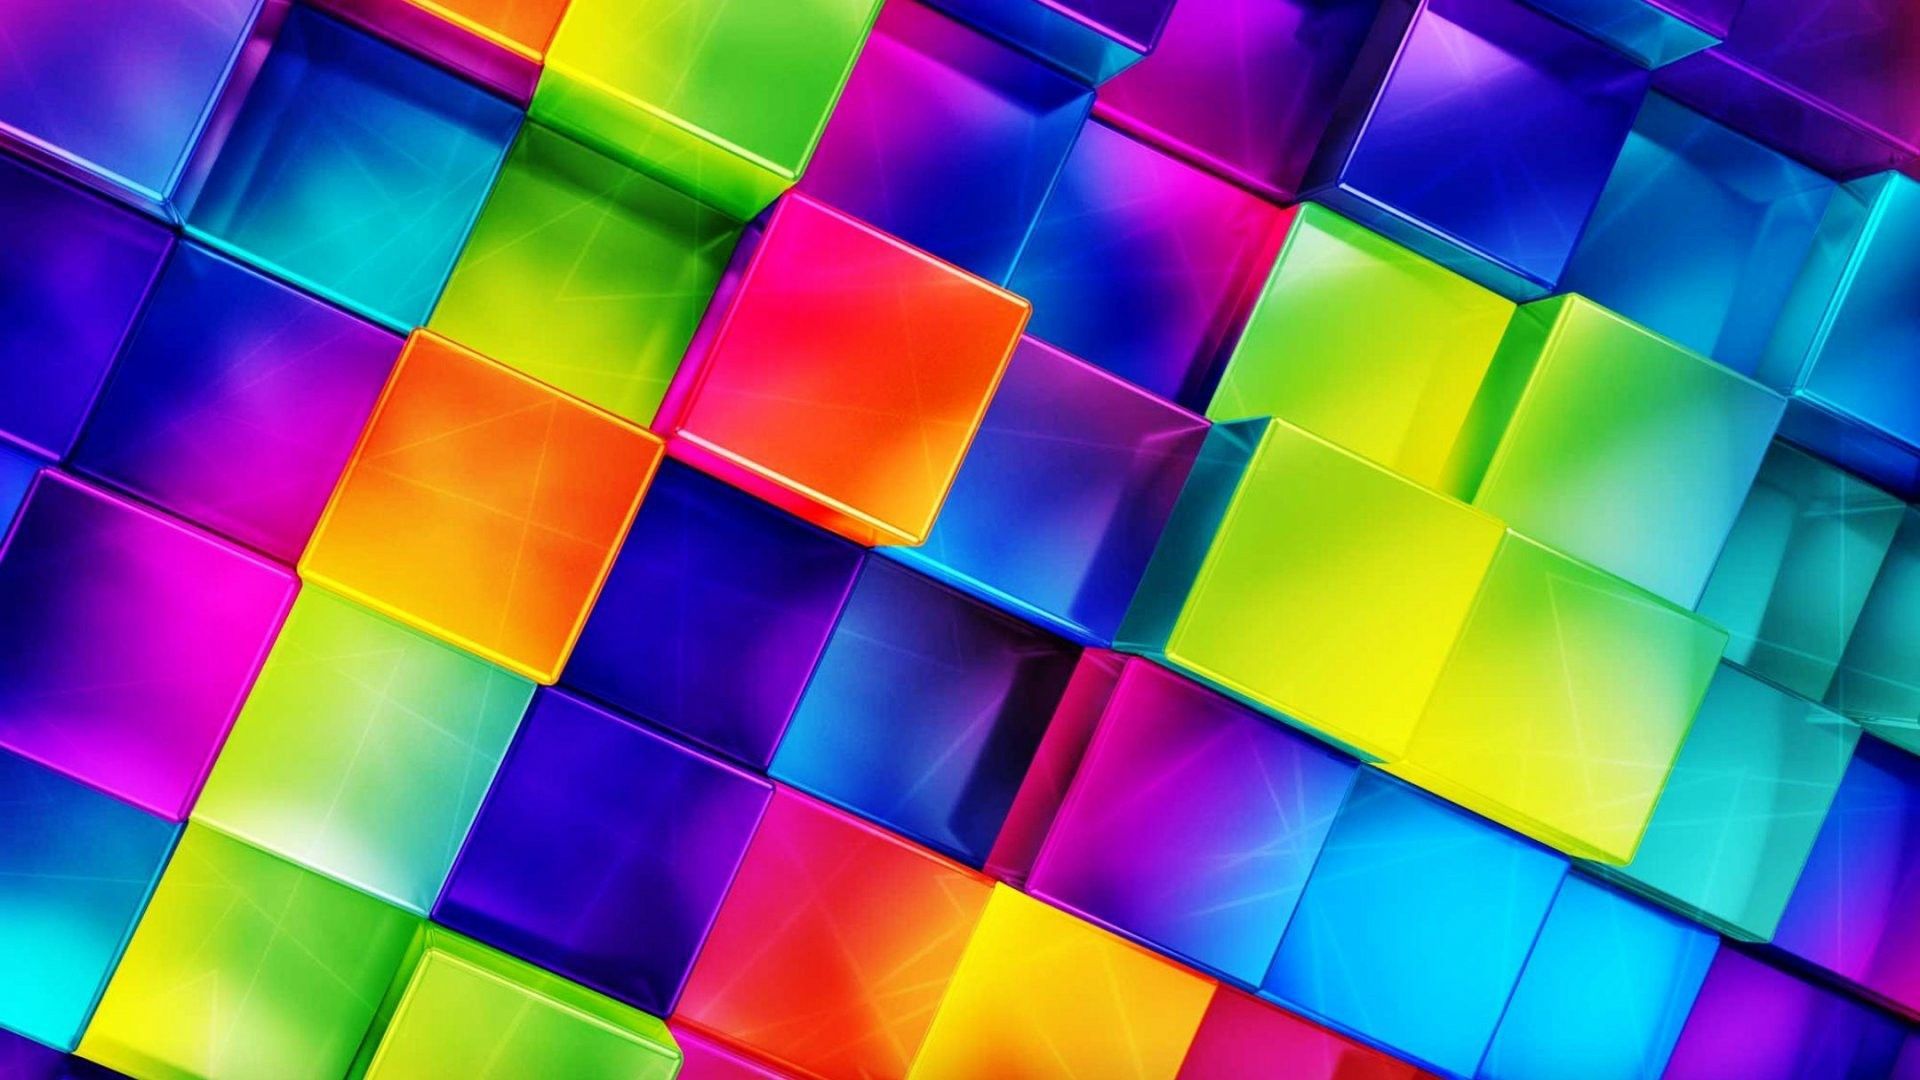 Abstract 1920x1080 Resolution Wallpapers Laptop Full HD 1080P